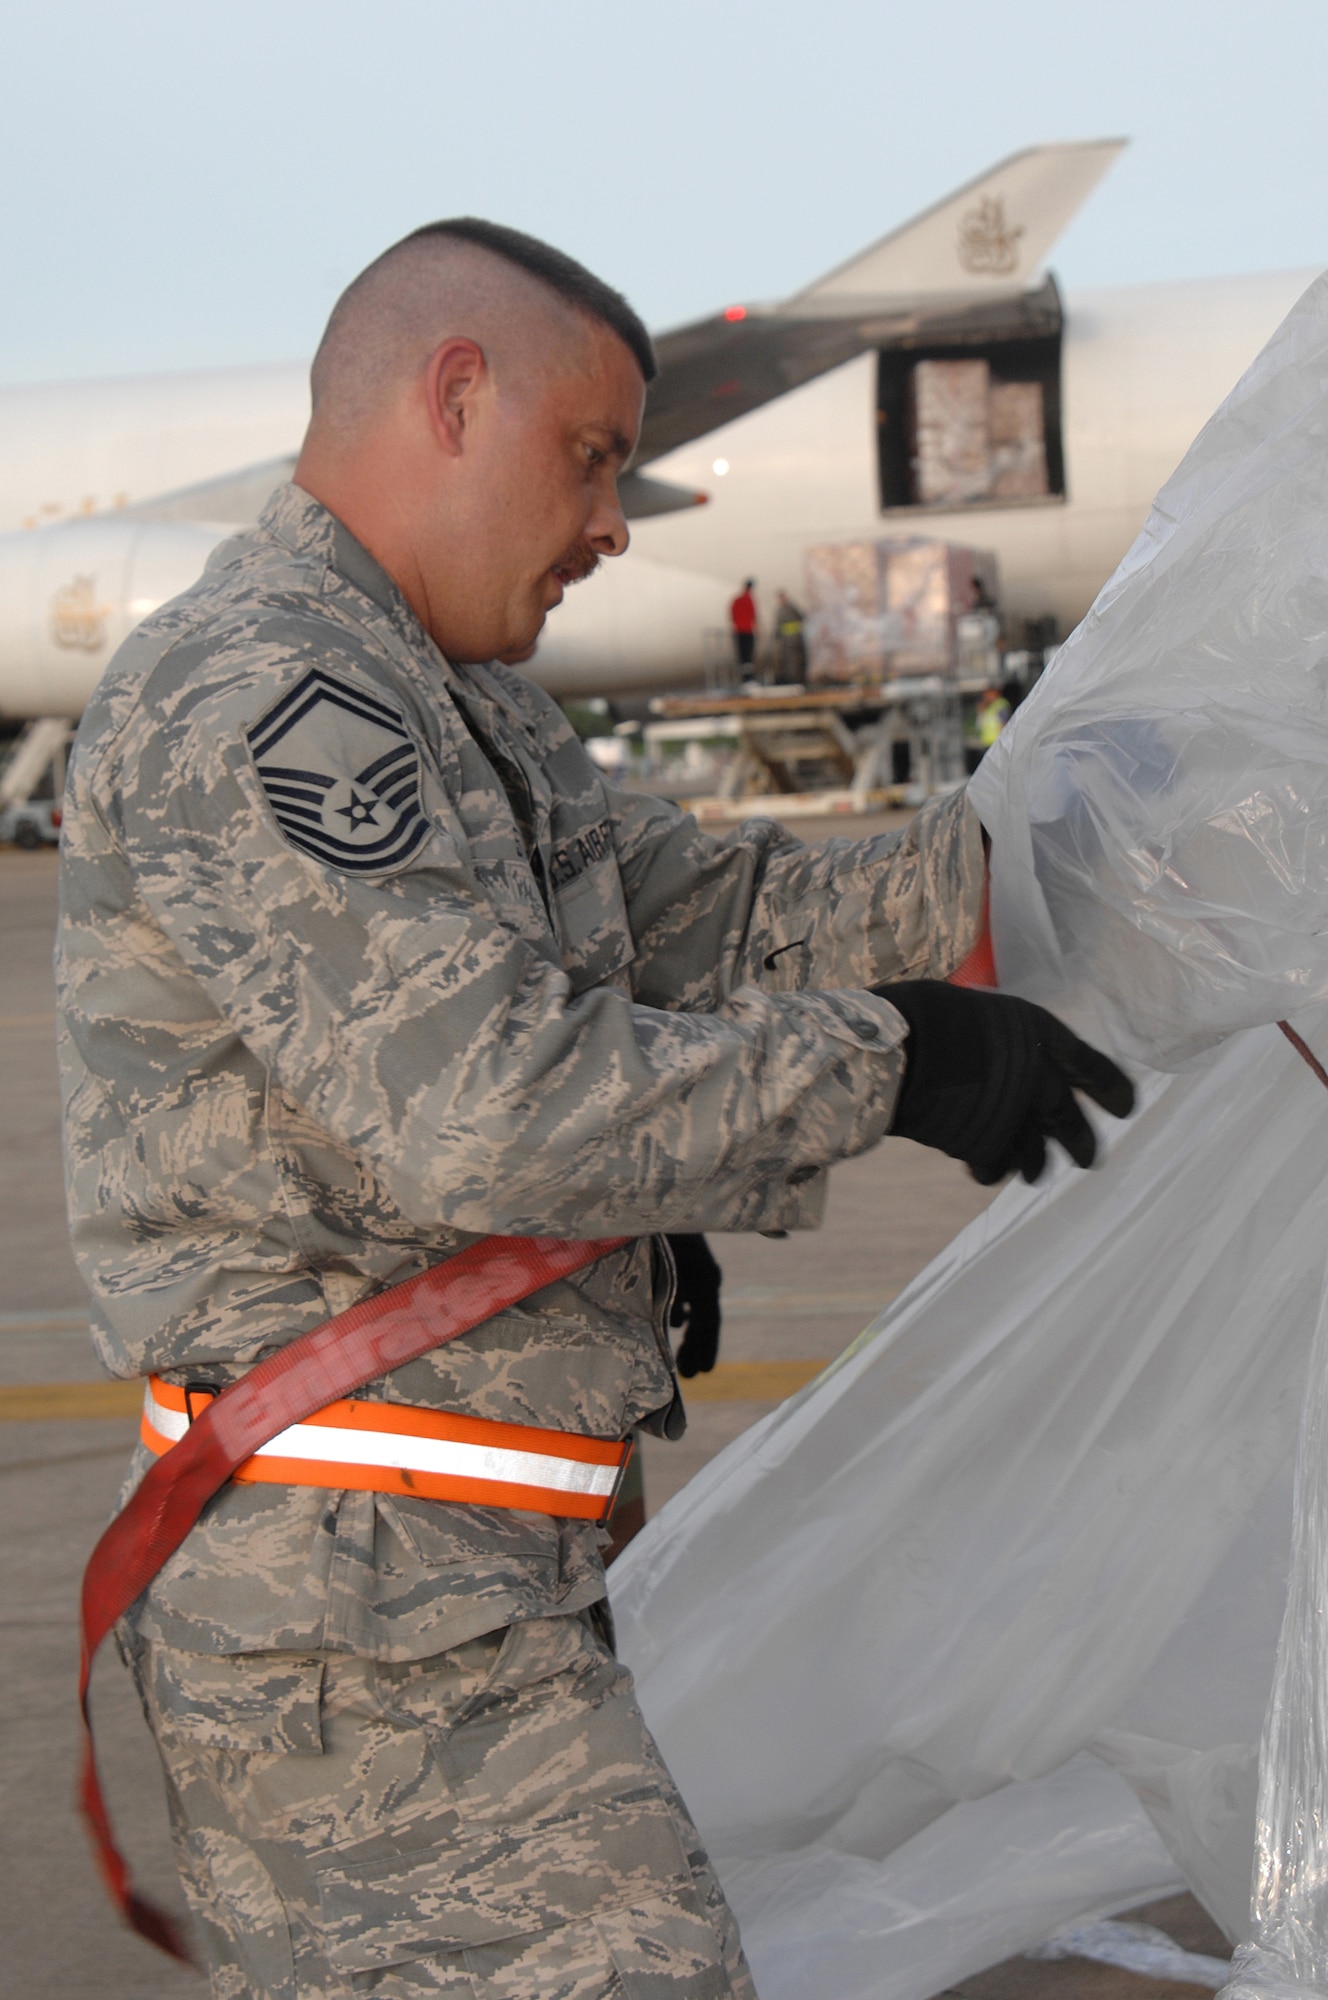 Utapao, Thailand - Senior Master Sgt Gregory Stone, removes plastic lining from a pallet of relief supplies being delivered from Utapao Thai Royal Navy Air Base, Thailand to Burma May 16. SMSgt Stone is forward deployed with the 36th Contingency Response Group from Andersen AFB, Guam. (USAF photo/Senior Airman Sonya Croston)(RELEASED)